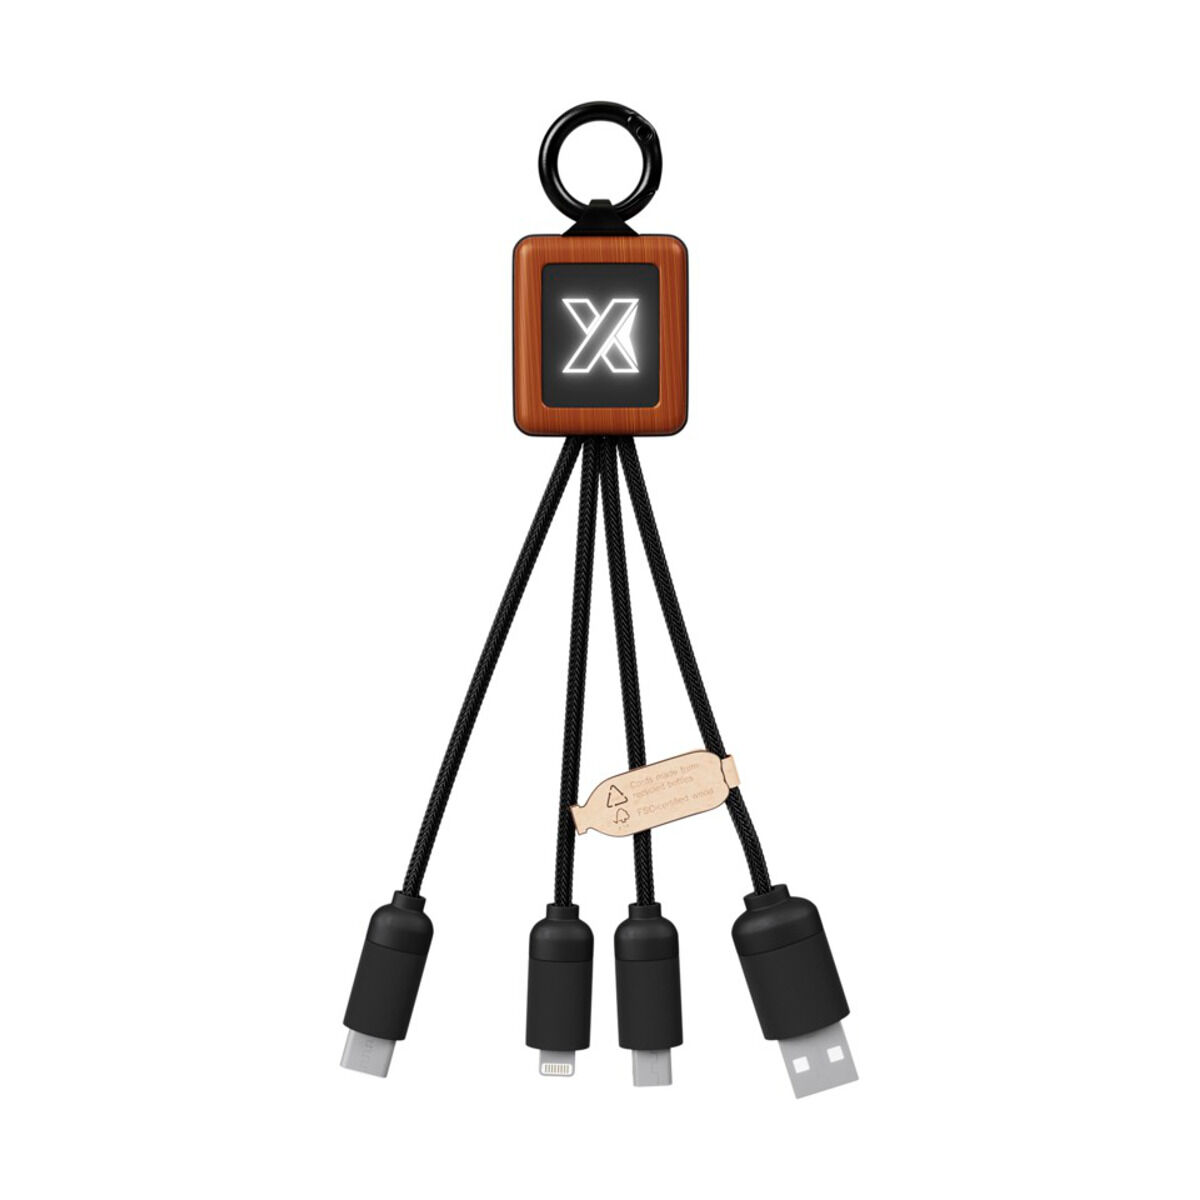 3-in-1 wooden cable with light-up logo